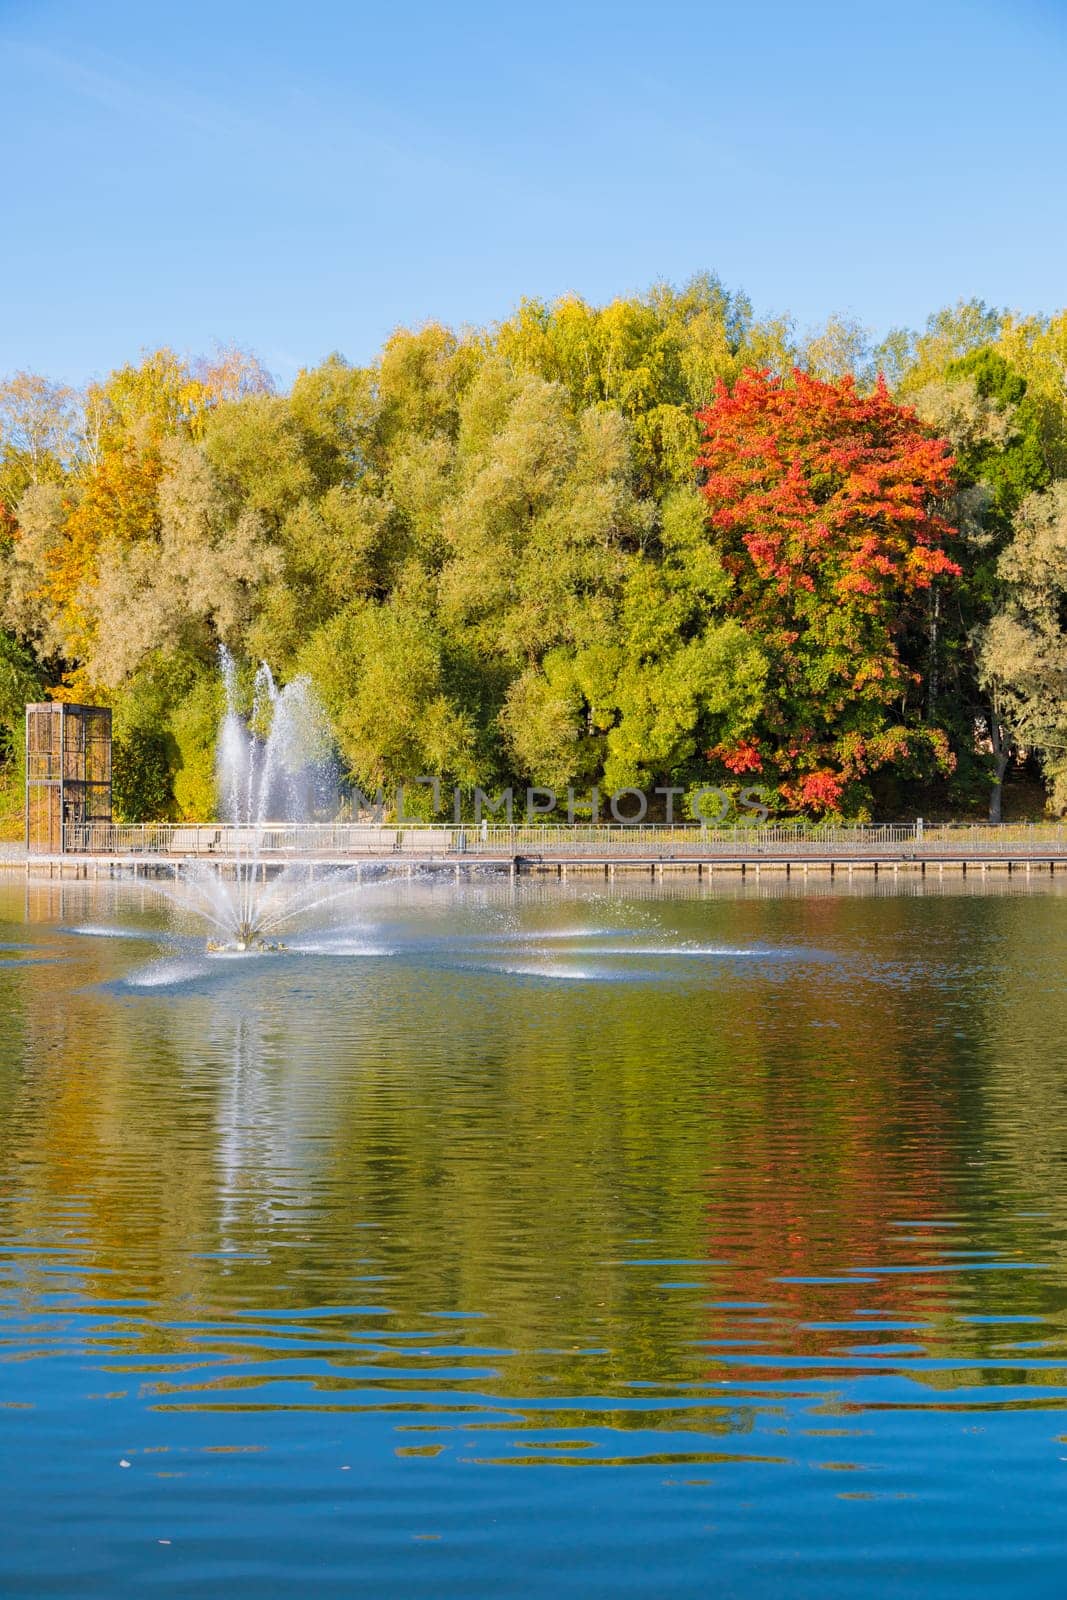 The magical beauty of the autumn park with a fountain on the pond brings peace and quiet by Yurich32